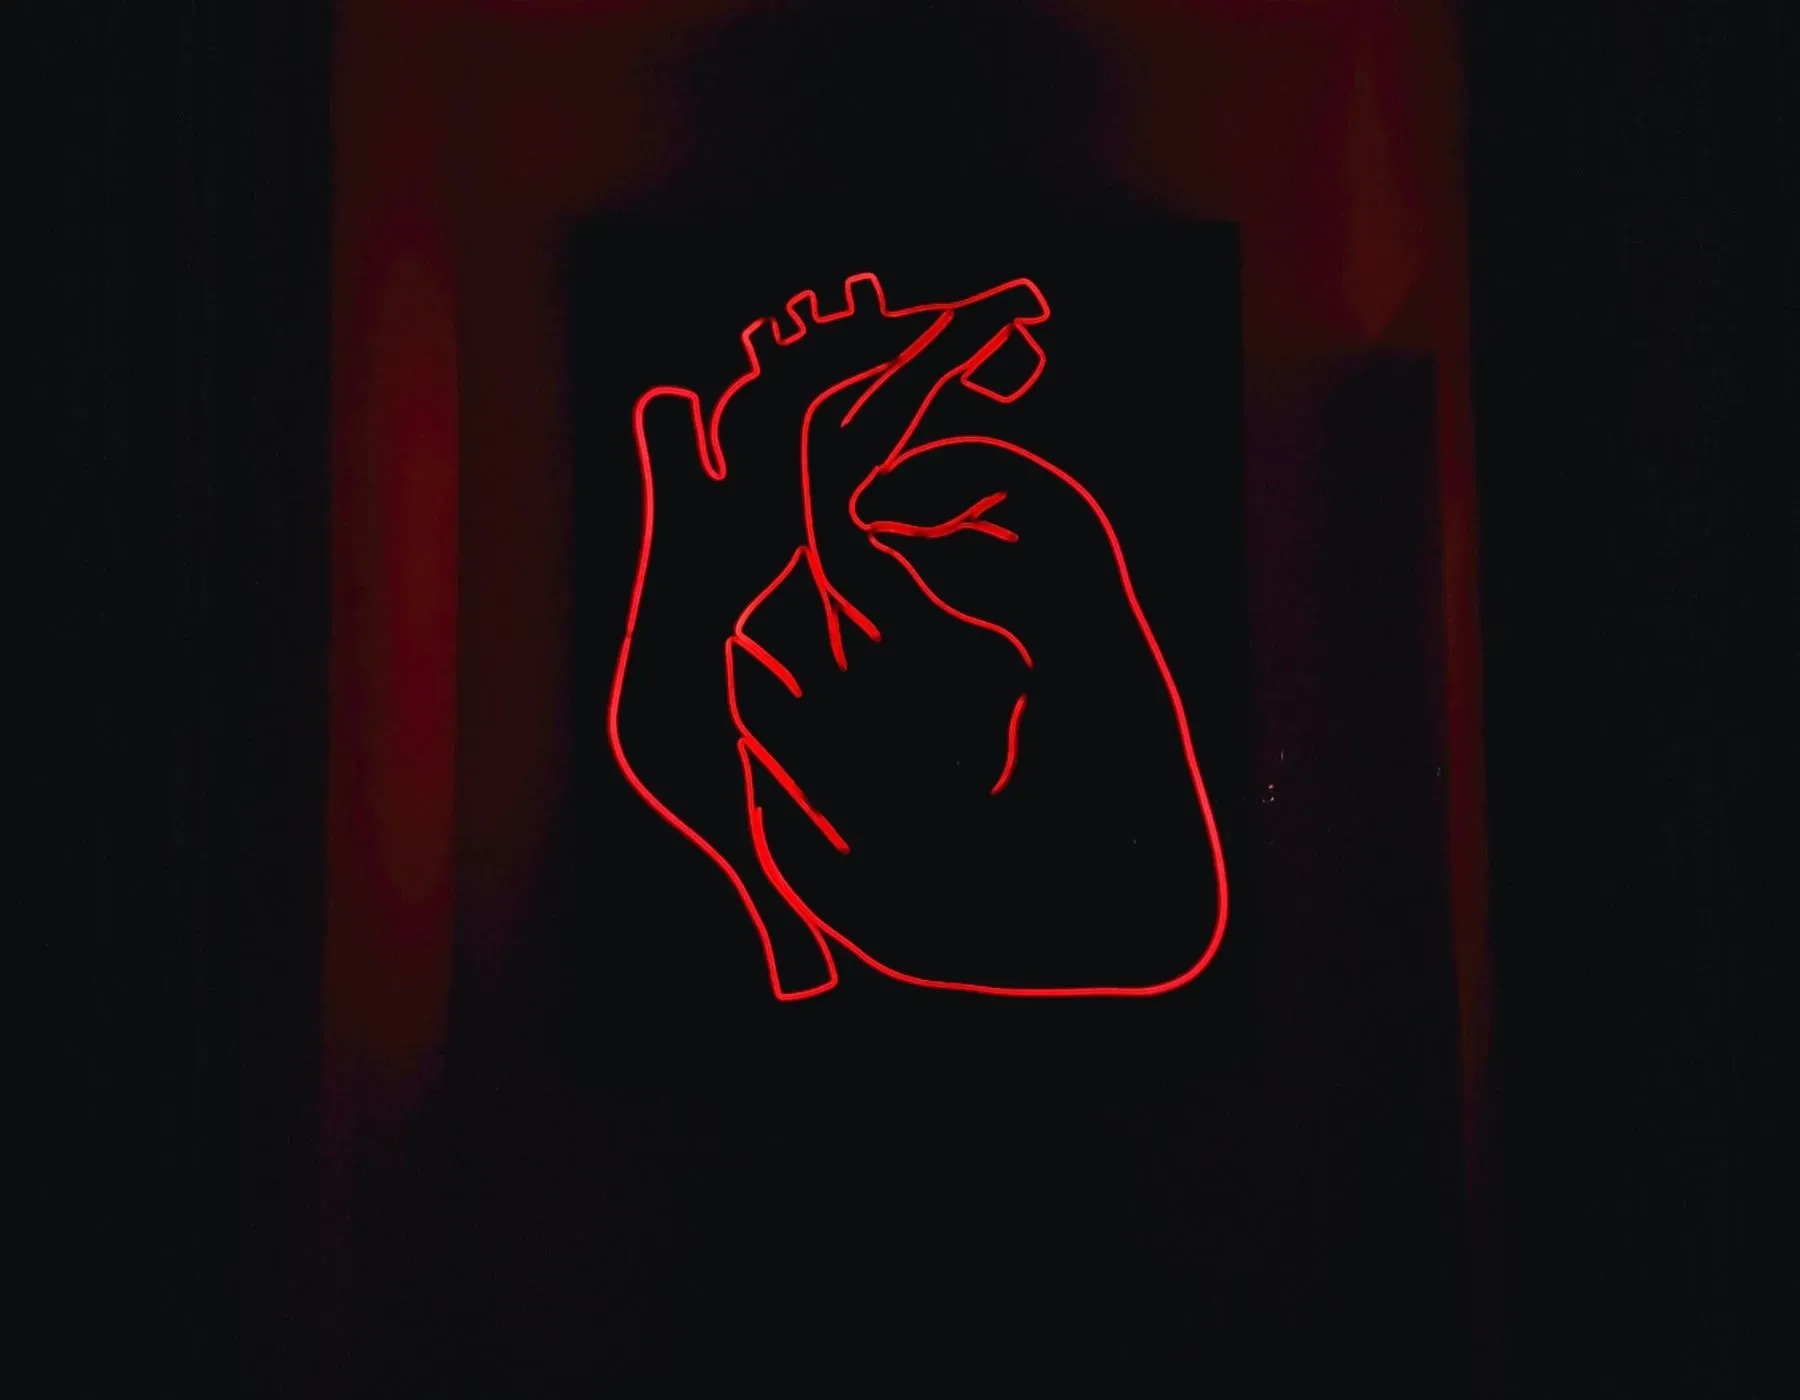 An illuminated art sketch of a heart signaling a link between a Sedentary Death Syndrome and heart disease